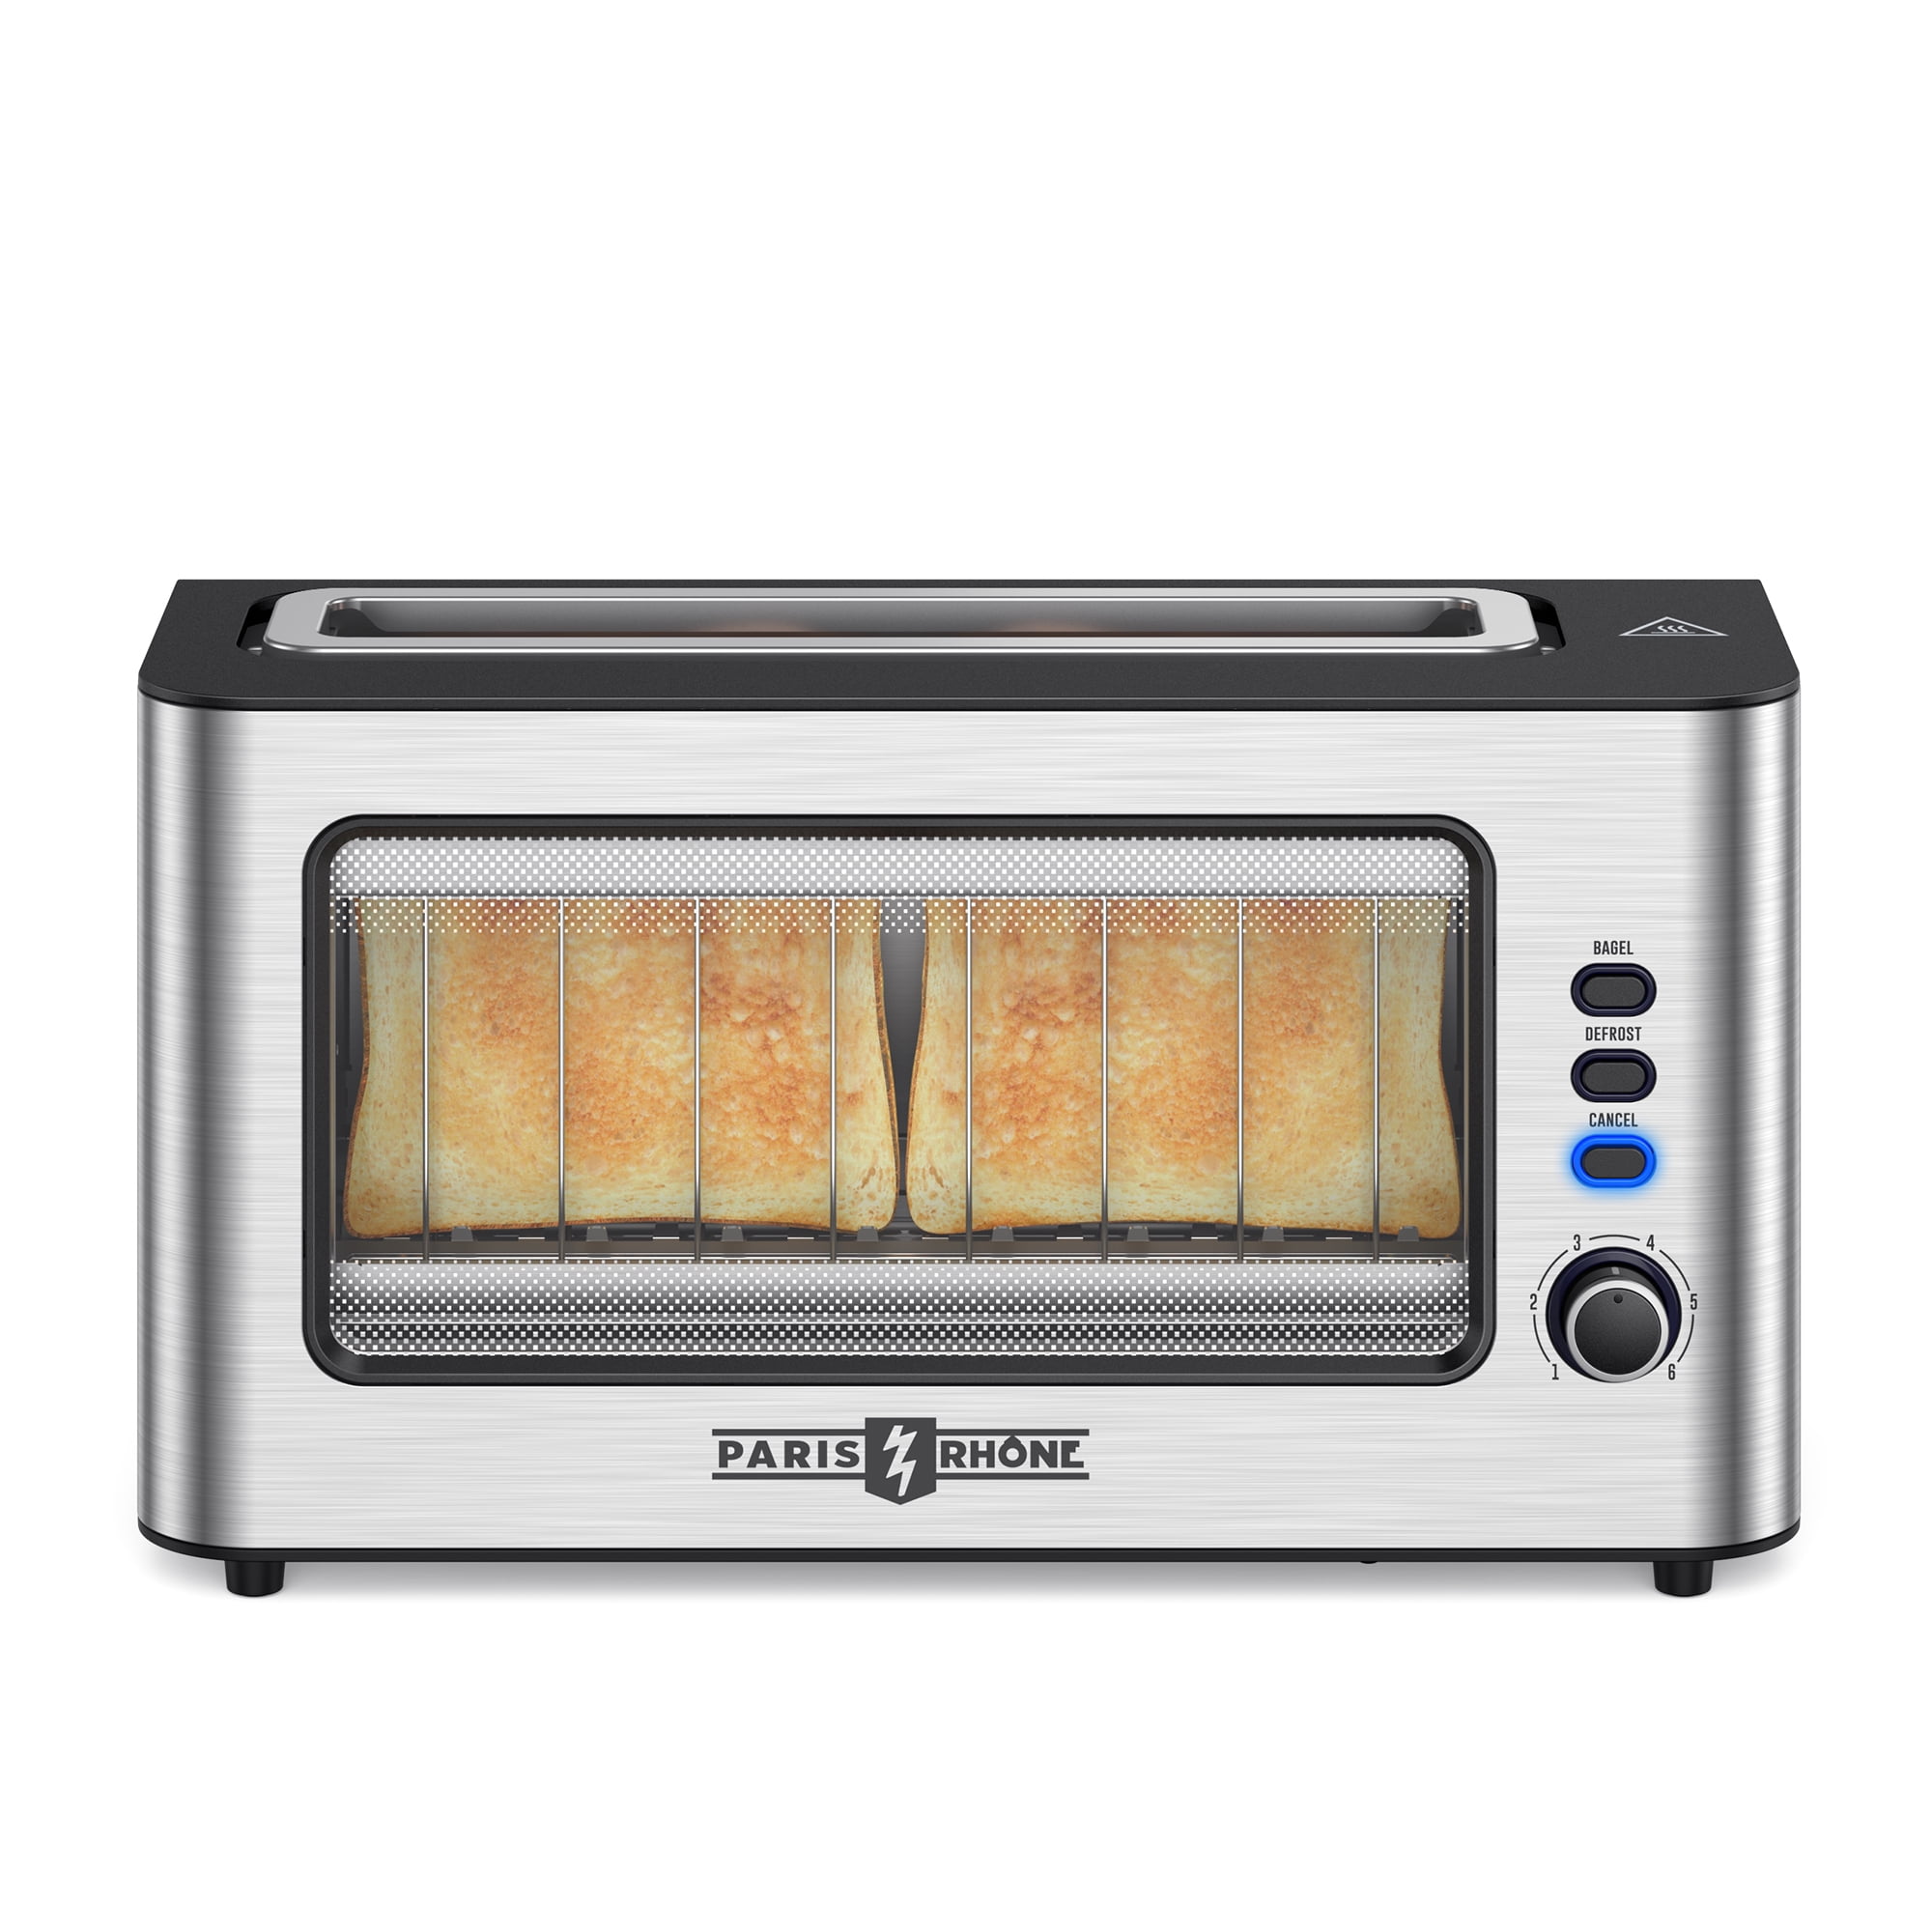 microscoop Trek Oh Paris Rhône Toaster, 2-Slice Extra Long & Wide Slot Toaster with Easy View  Window, Bagel, Defrost, Cancel Functions, 6 Browning Levels, Auto Shutoff,  Stainless Steel Toaster for Bagels, Waffles - Walmart.com